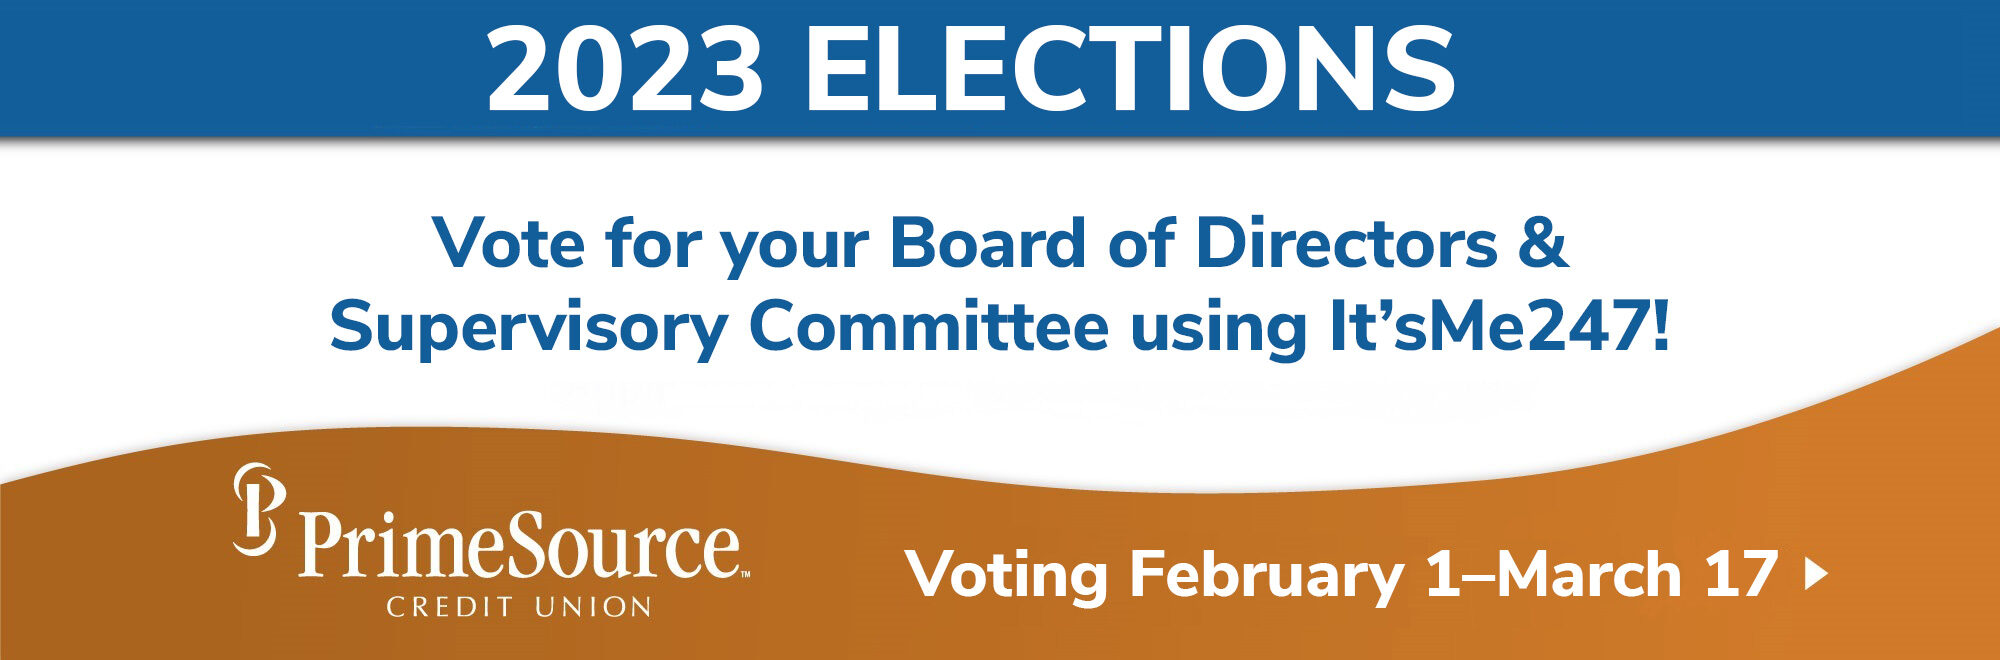 Vote for your 2023 Board of Directors and Supervisory Committee